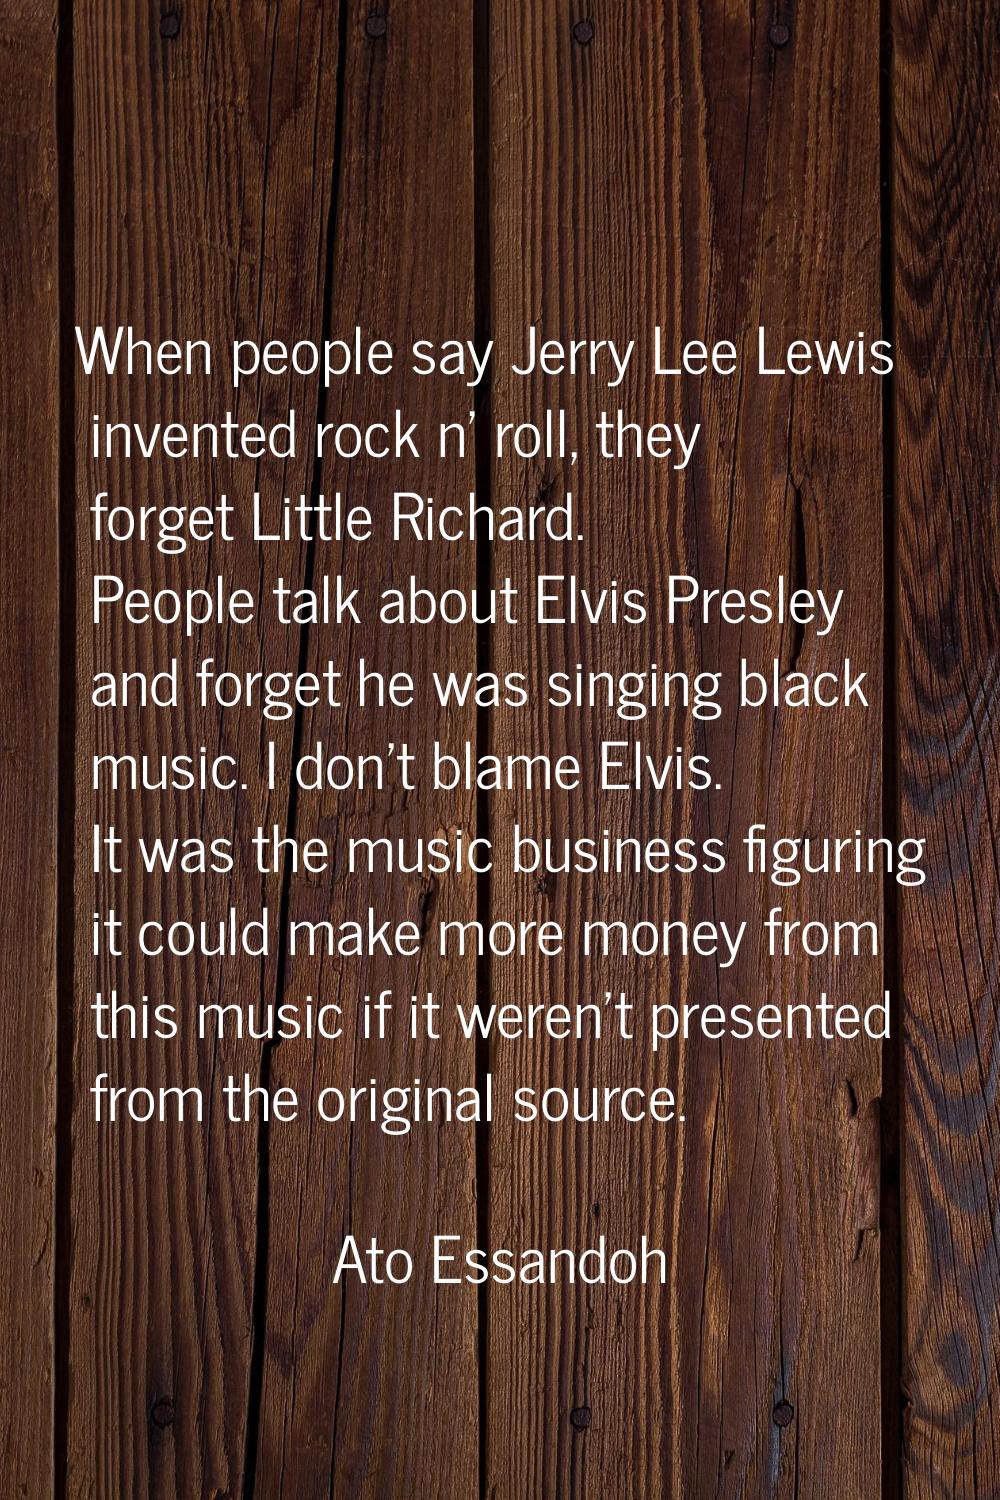 When people say Jerry Lee Lewis invented rock n' roll, they forget Little Richard. People talk abou